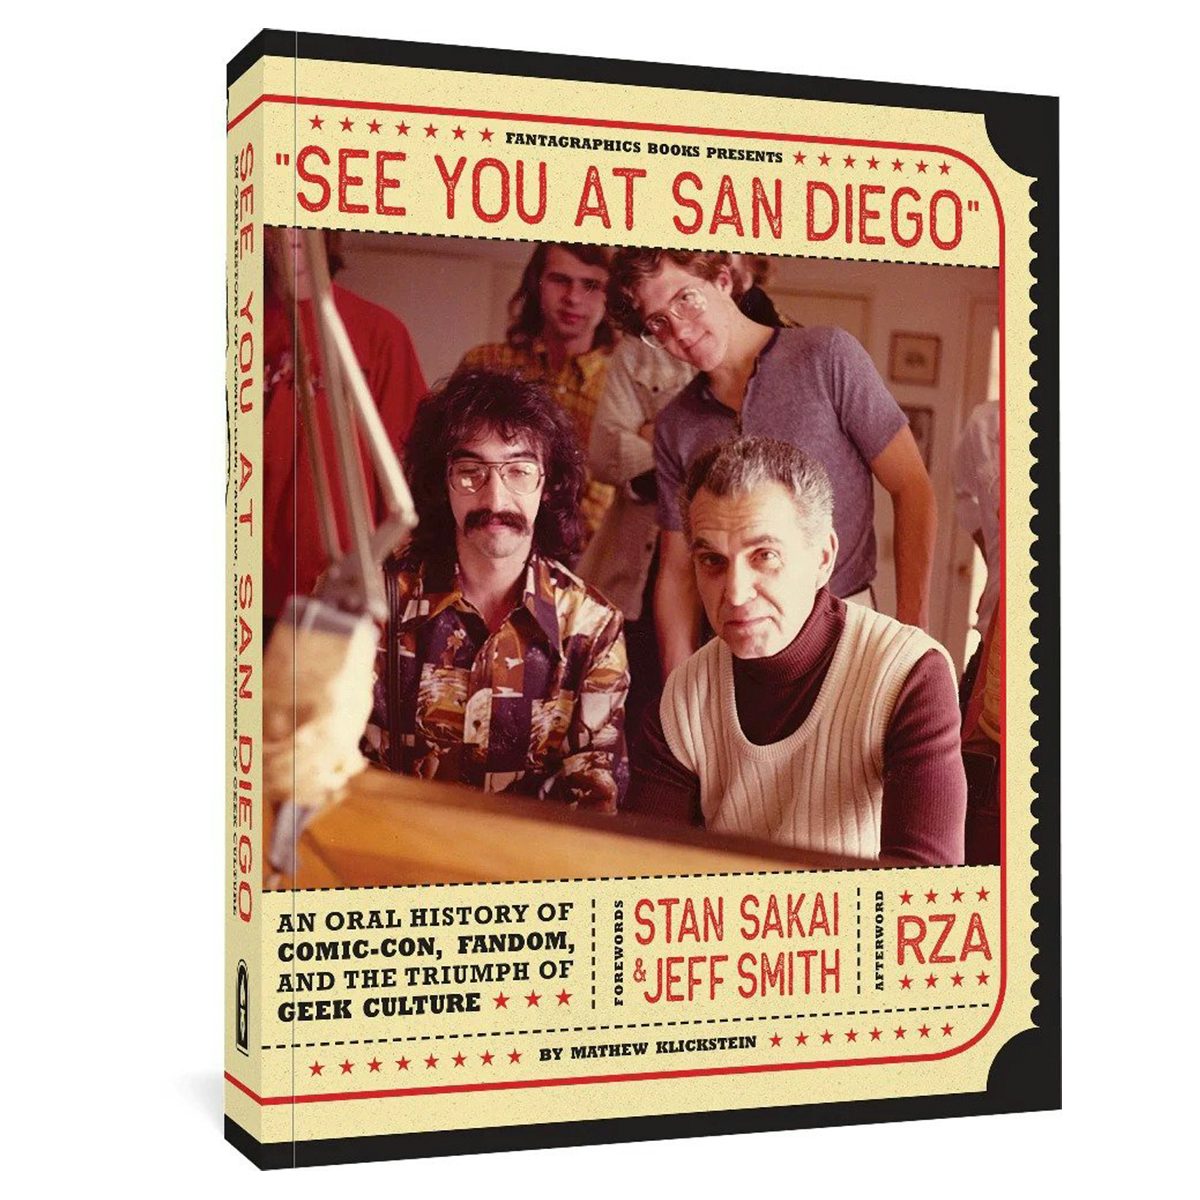 See You At San Diego: An Oral History of Comic-Con, Fandom, and the Triumph of Geek Culture